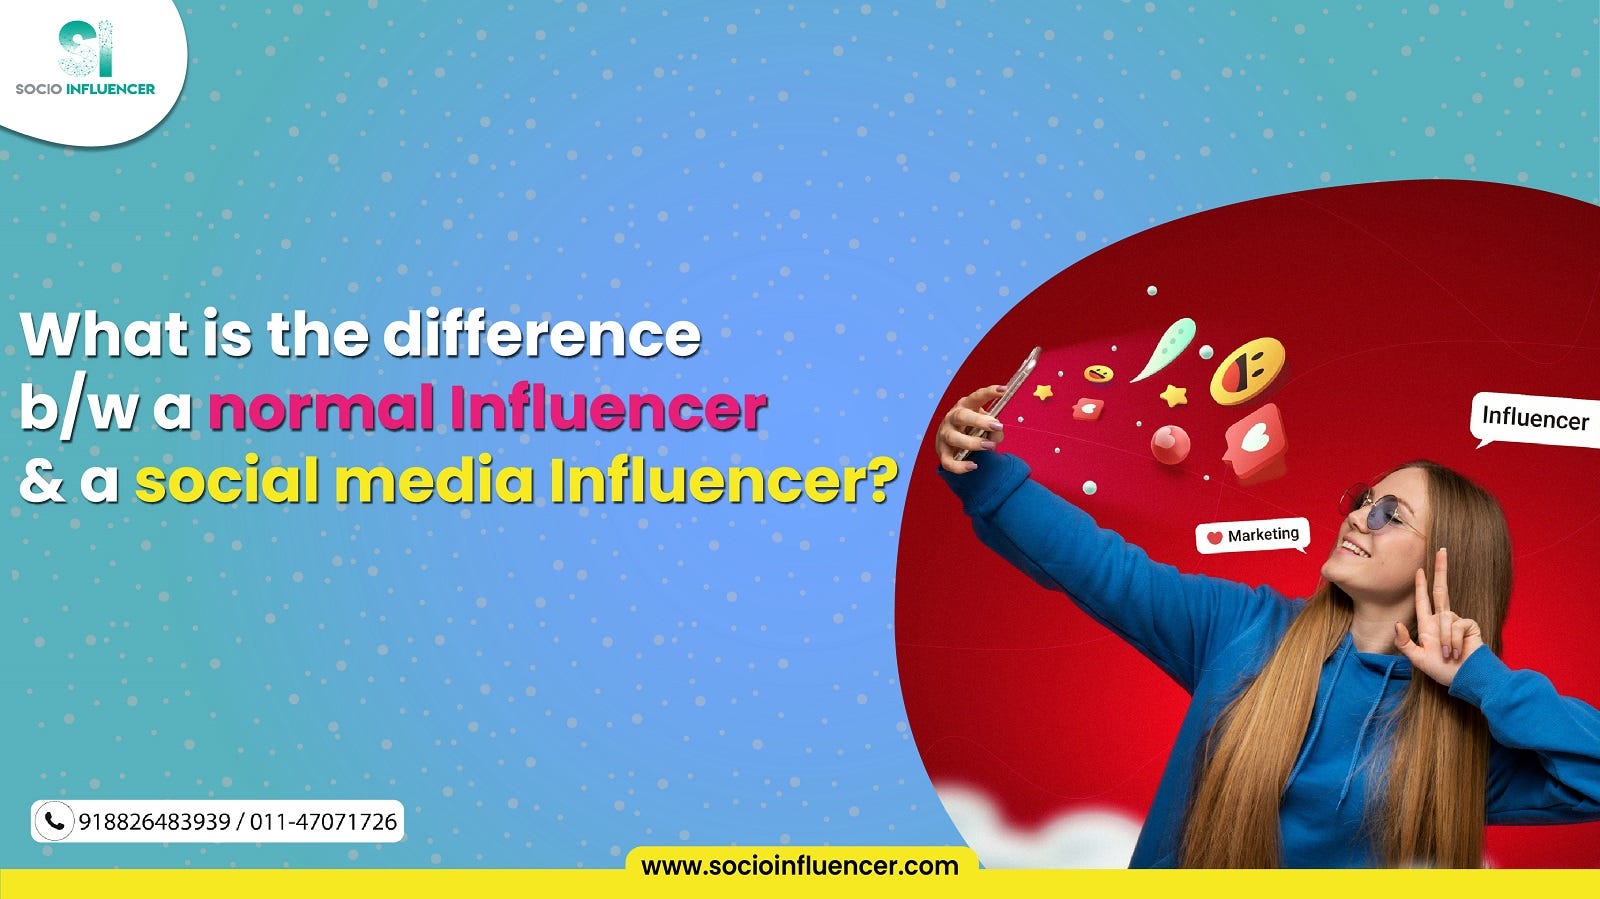 In What Ways Are Social Media Influencers Different from Normal Influencers?